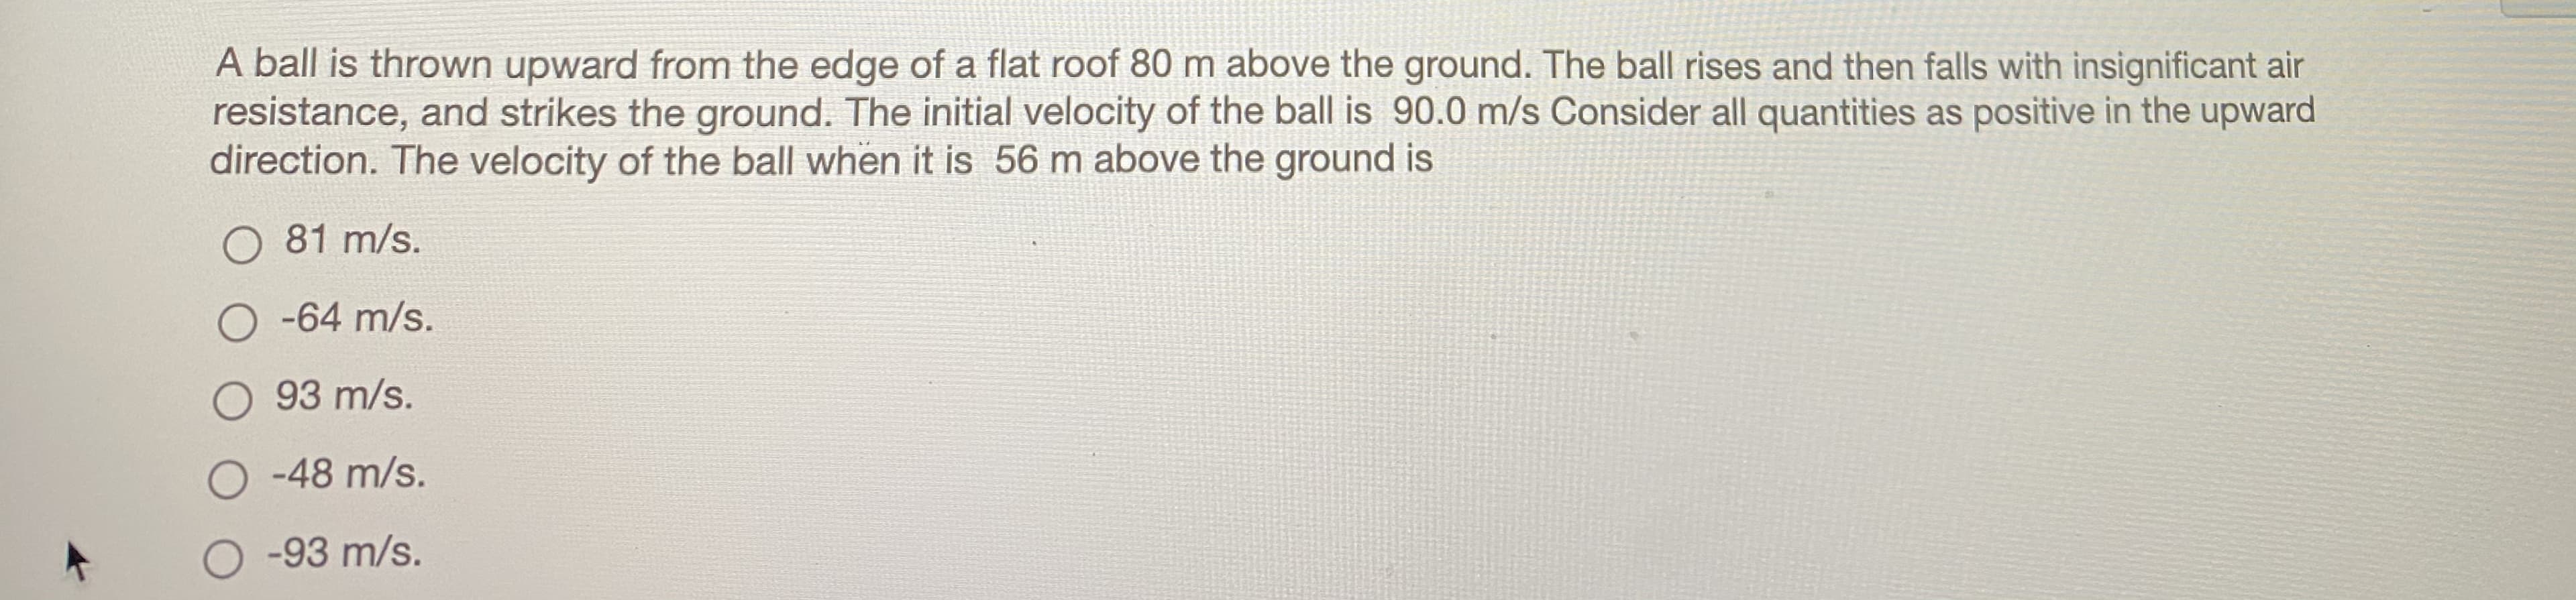 A ball is thrown upward from the edge of a flat roof 80 m above the ground. The ball rises and then falls with insignificant air
resistance, and strikes the ground. The initial velocity of the ball is 90.0 m/s Consider all quantities as positive in the upward
direction. The velocity of the ball when it is 56 m above the ground is
O 81 m/s.
O -64 m/s.
O 93 m/s.
O -48 m/s.
O -93 m/s.
